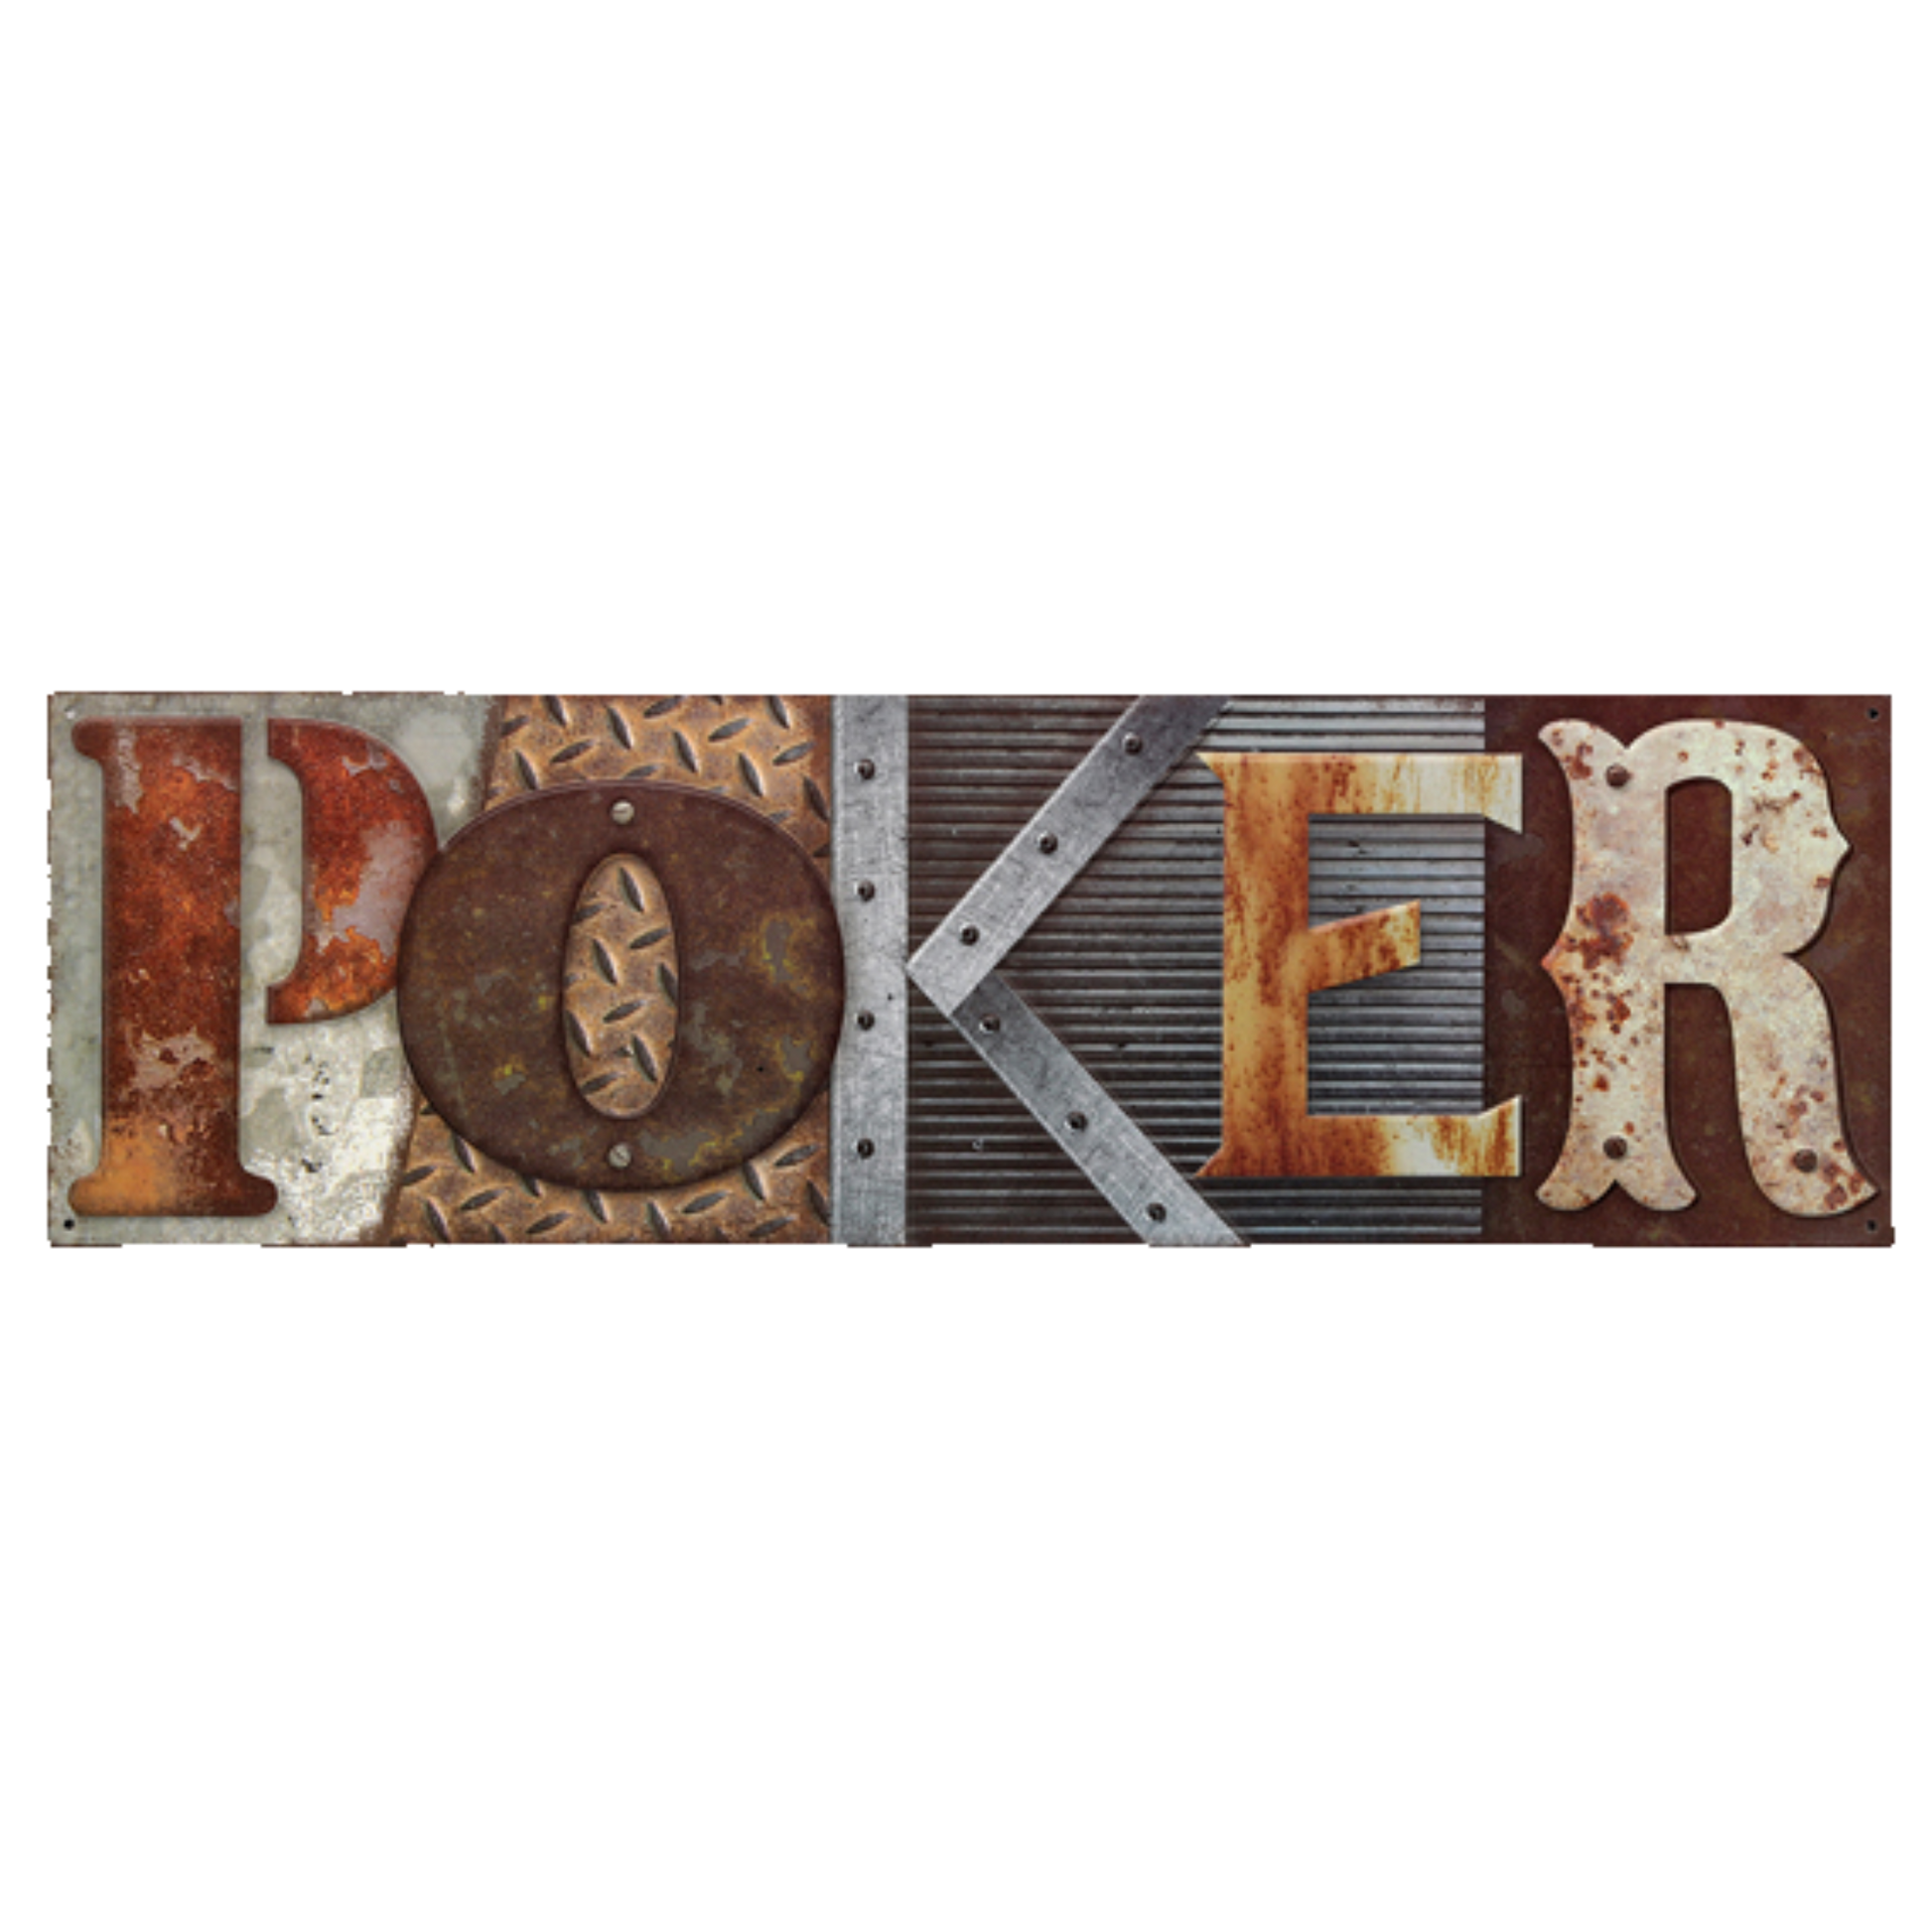 Rusty tin sign spelling out "POKER" with industrial and vintage design elements.